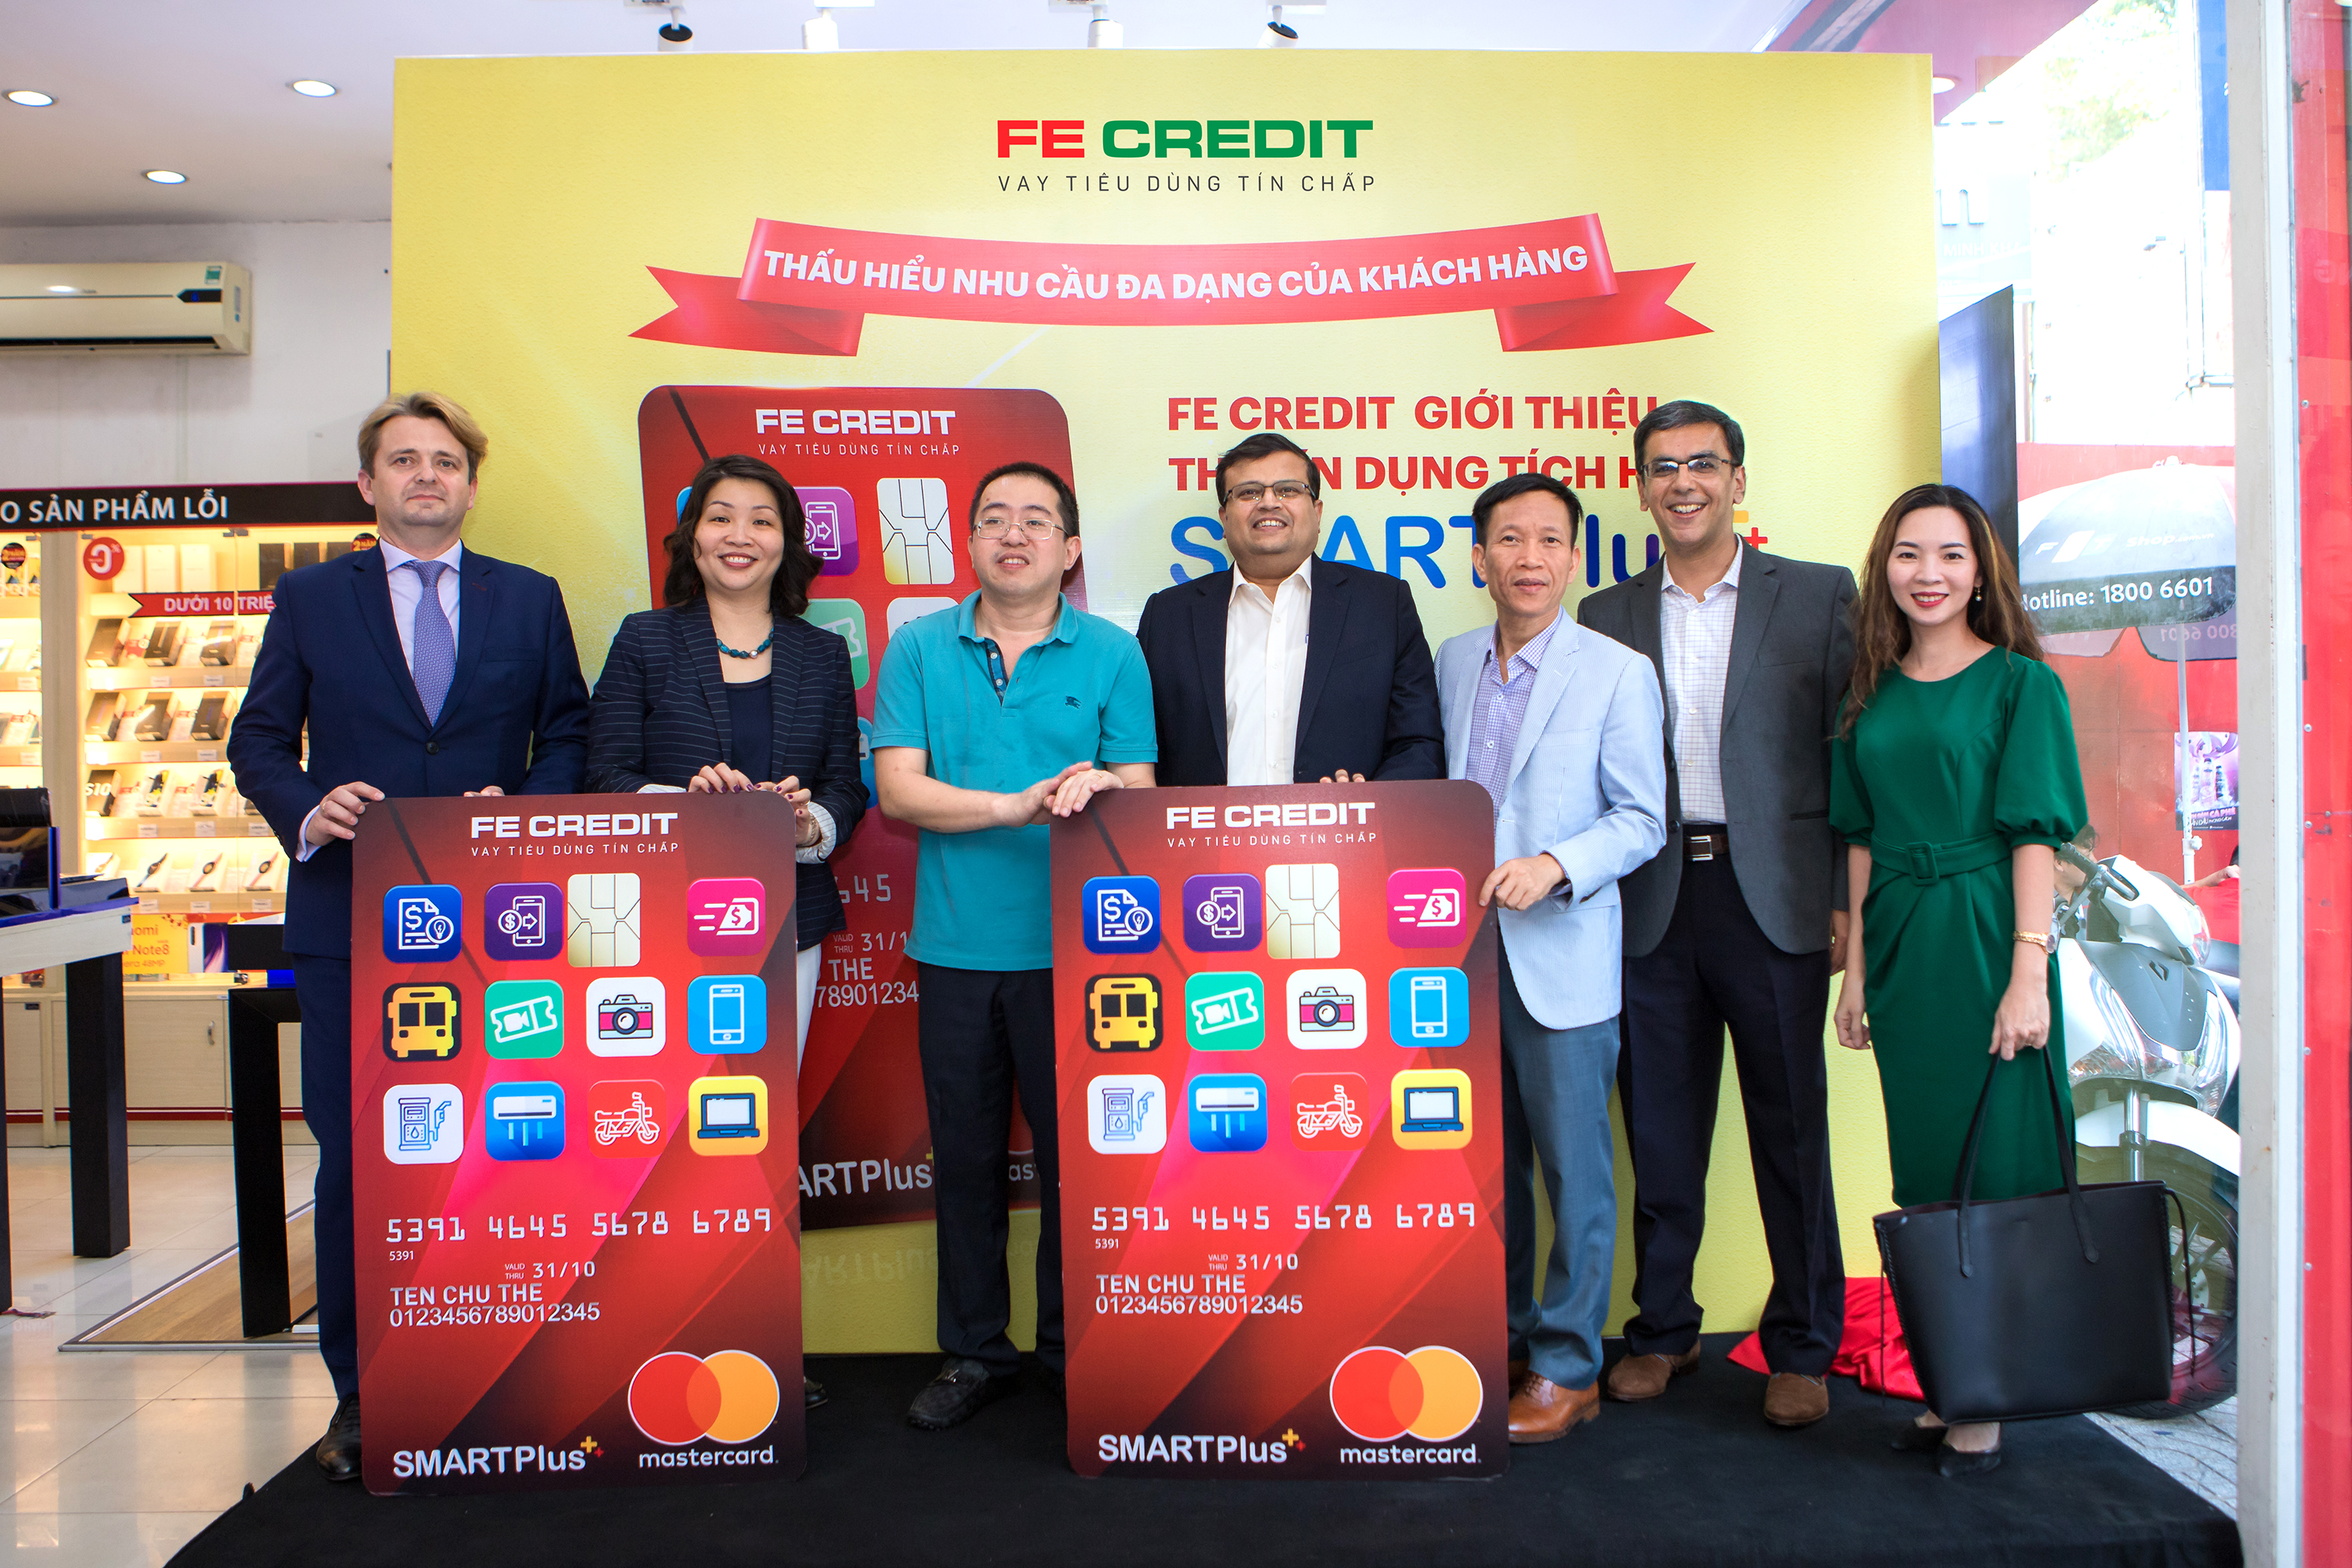 FE Credit launches the revolutionary "Combo Pack" card - Smart Plus+